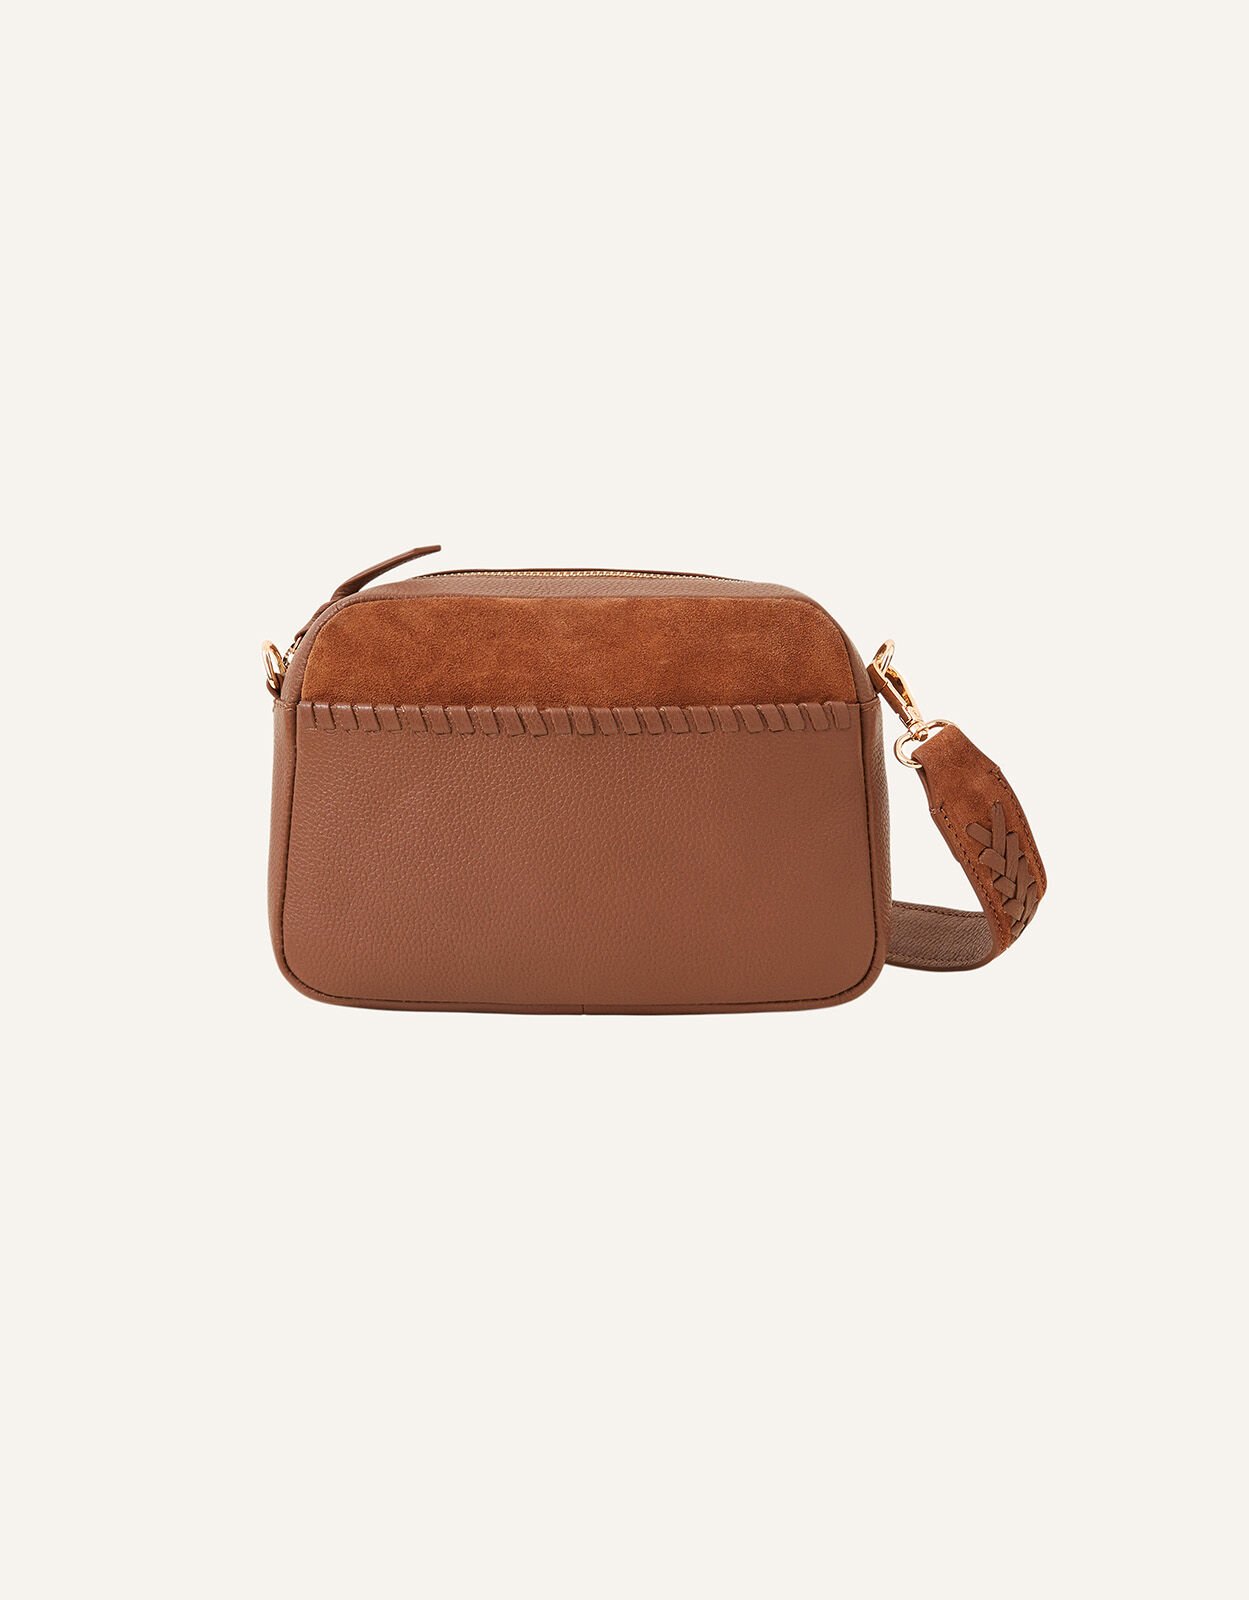 Luxury Leather Jac Small Handbags For Women Suede, Popular 2023 Design,  Simple Texture, Single Shoulder, Early Winter Fashion FJB7 From  Fishhandbags, $80.1 | DHgate.Com